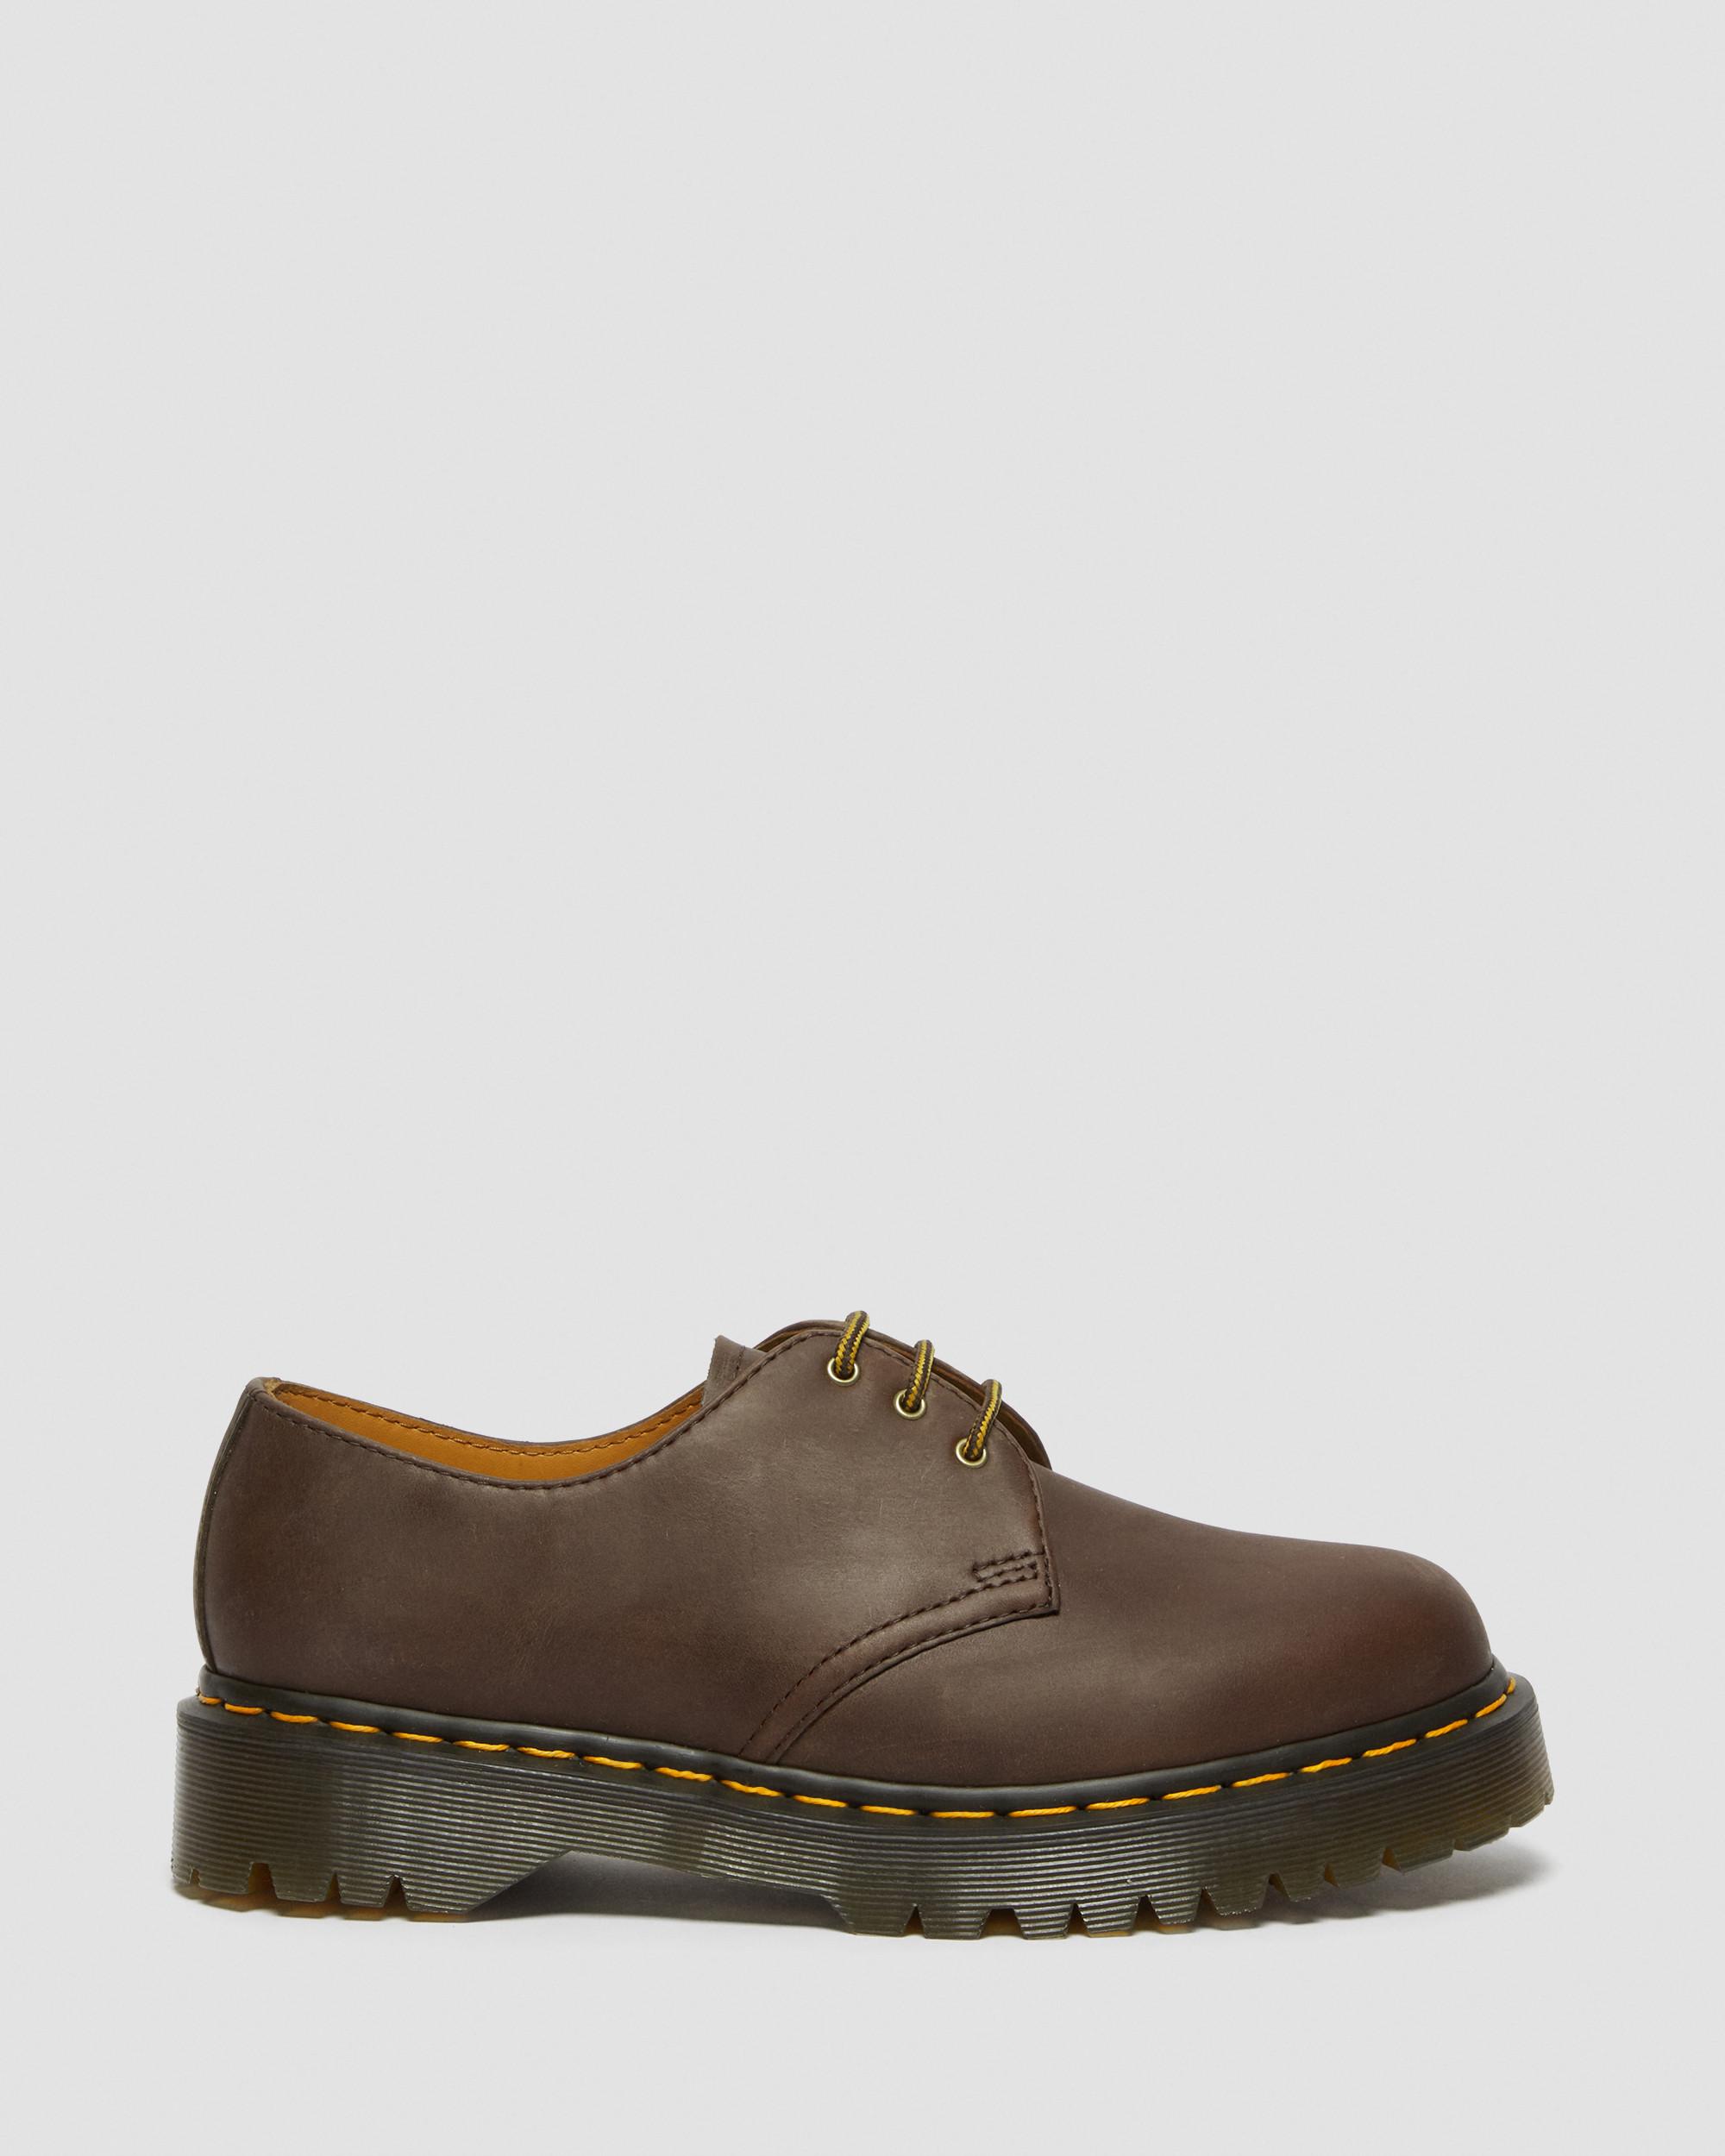 1461 Bex Crazy Horse Leather Oxford Shoes in Dark Brown